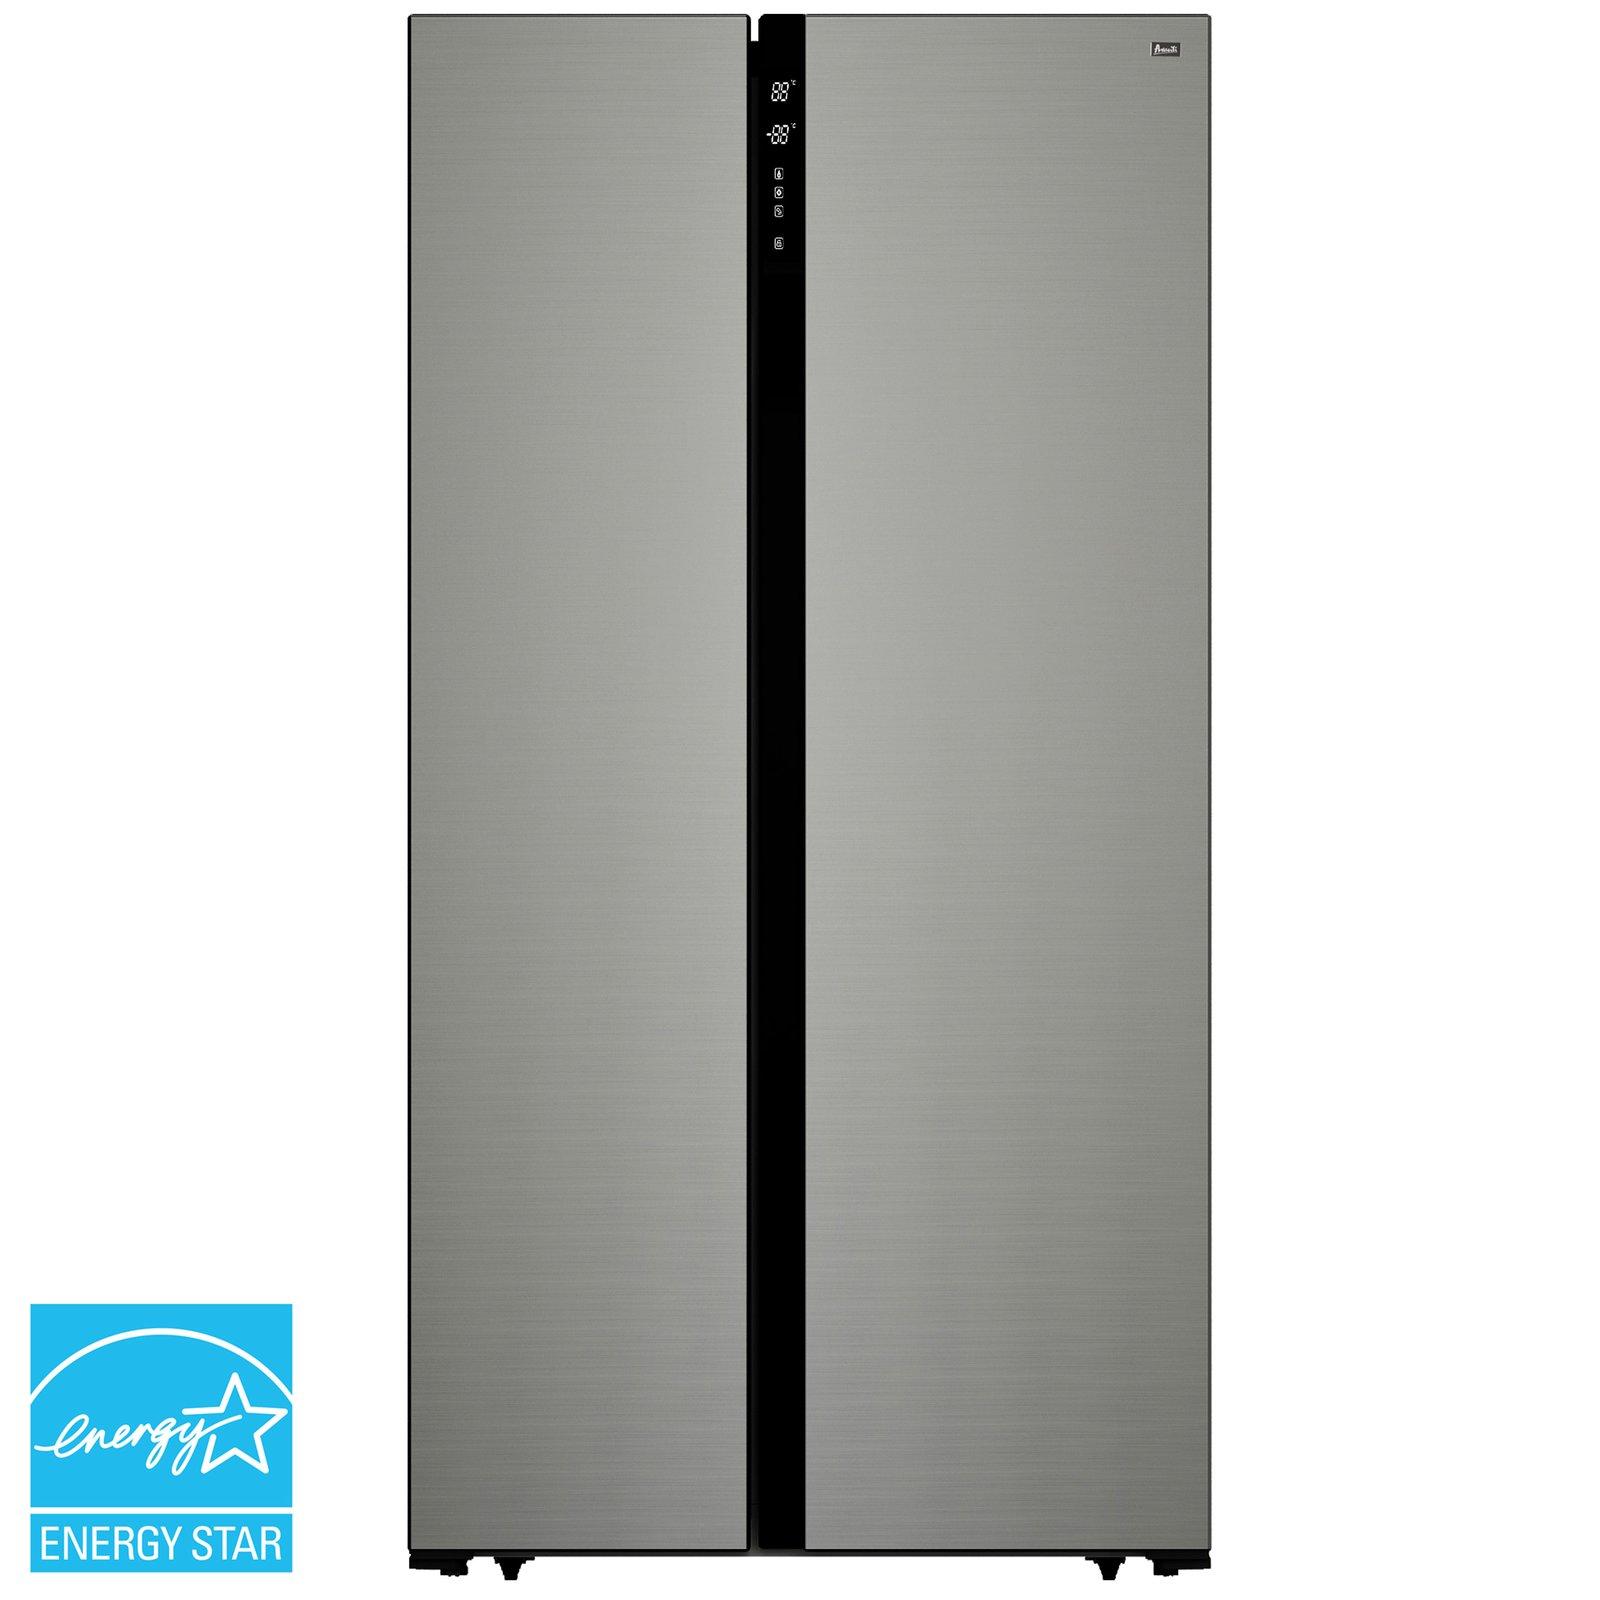 Avanti 15.6 cu. ft. Side-by-Side Apartment Size Refrigerator - Stainless Steel / 15.6 cu. ft.